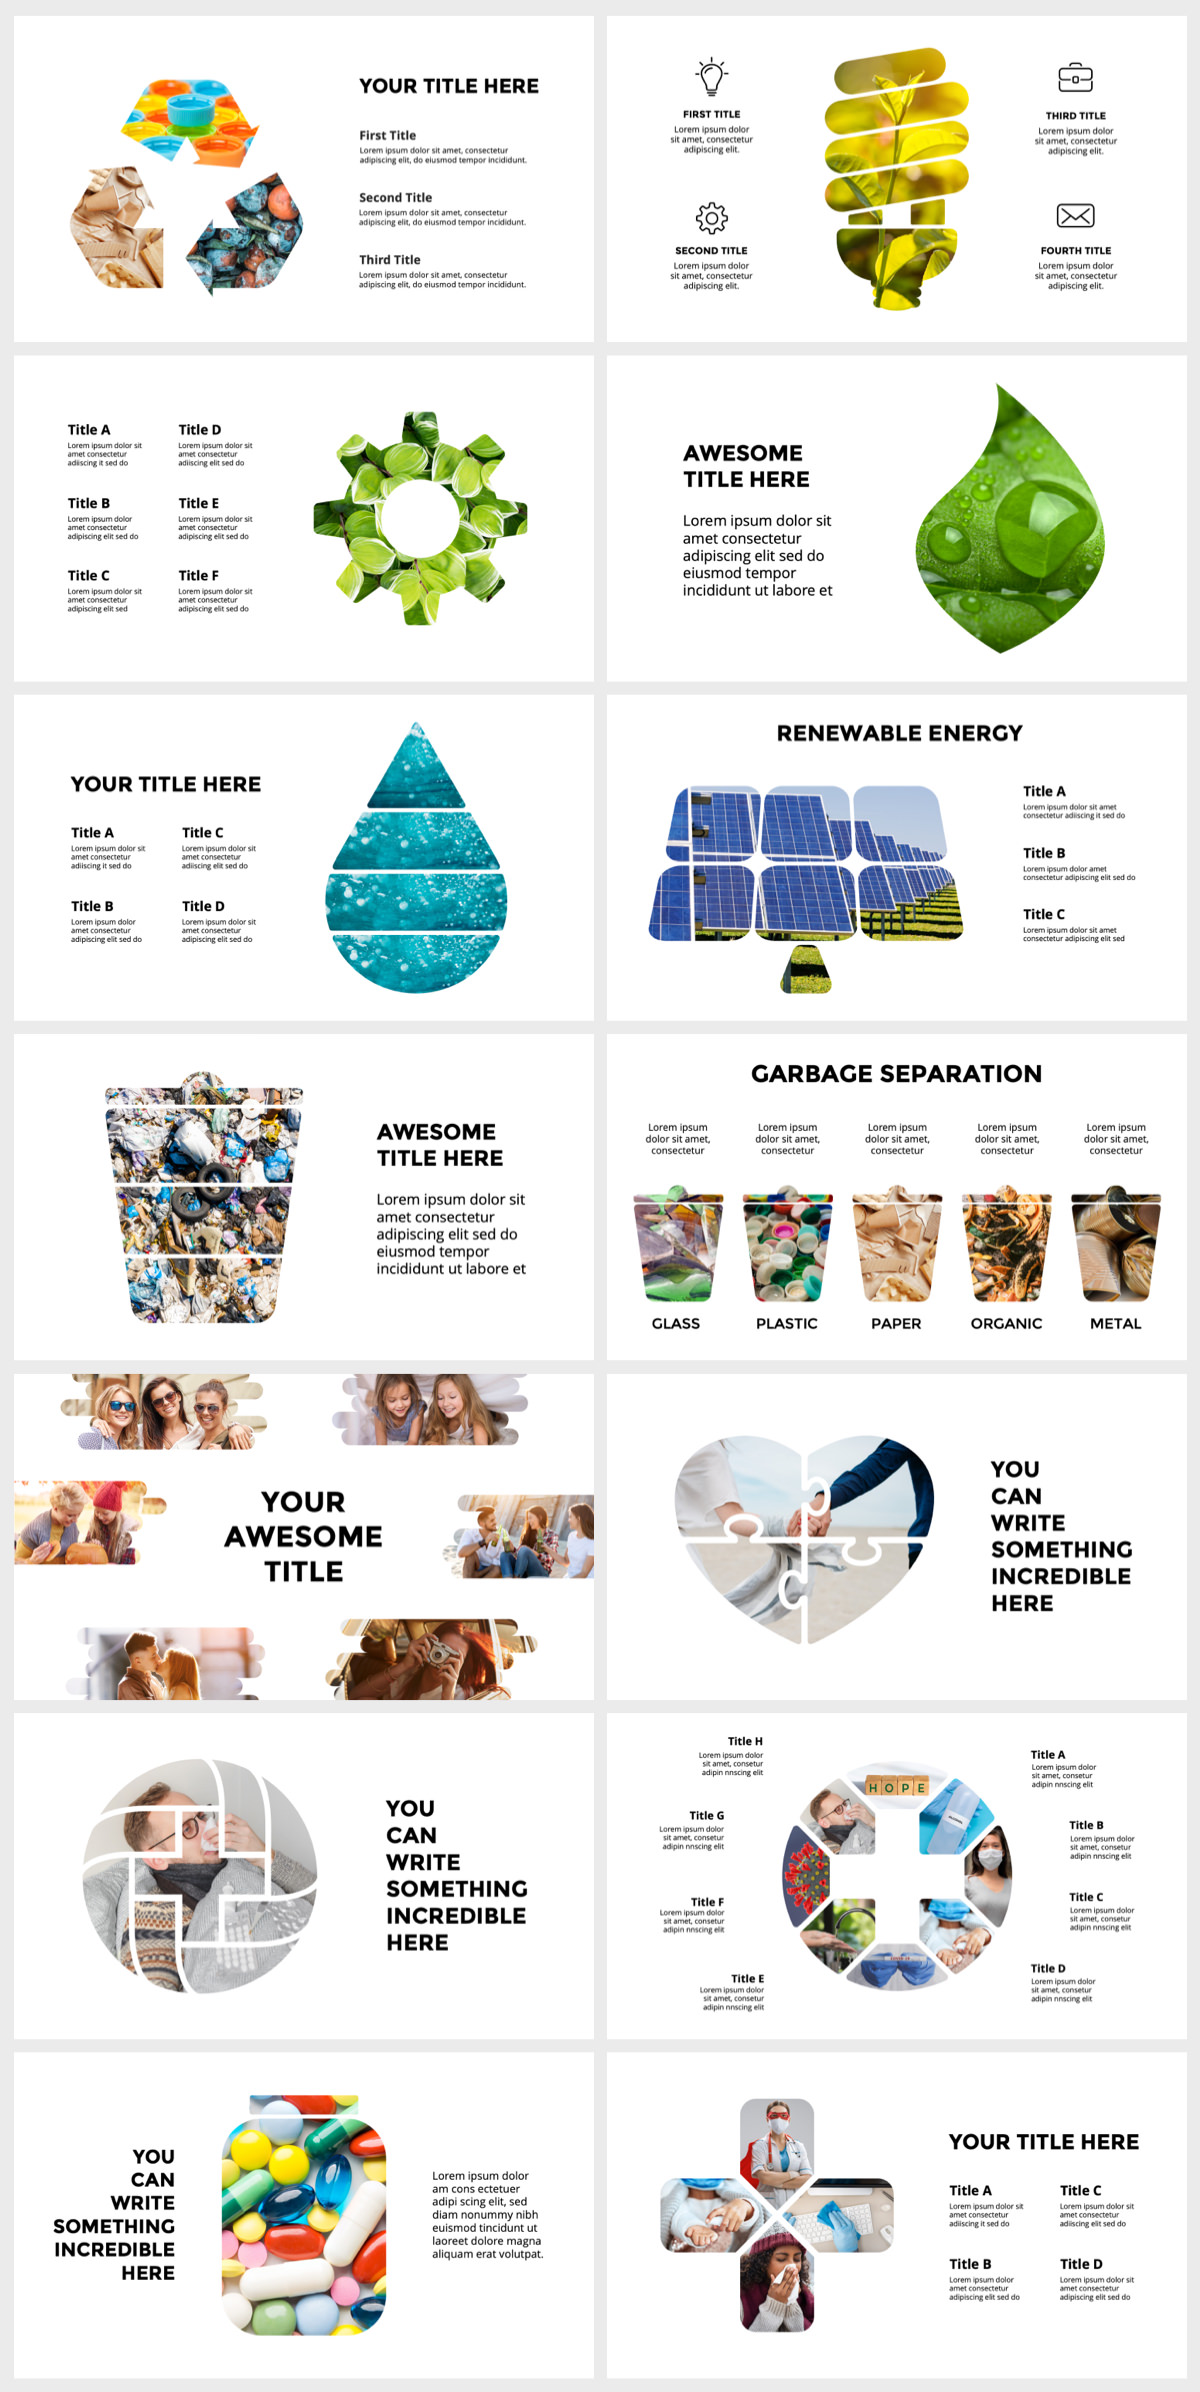 Wowly - 3500 Infographics & Presentation Templates! Updated! PowerPoint Canva Figma Sketch Ai Psd. - 242